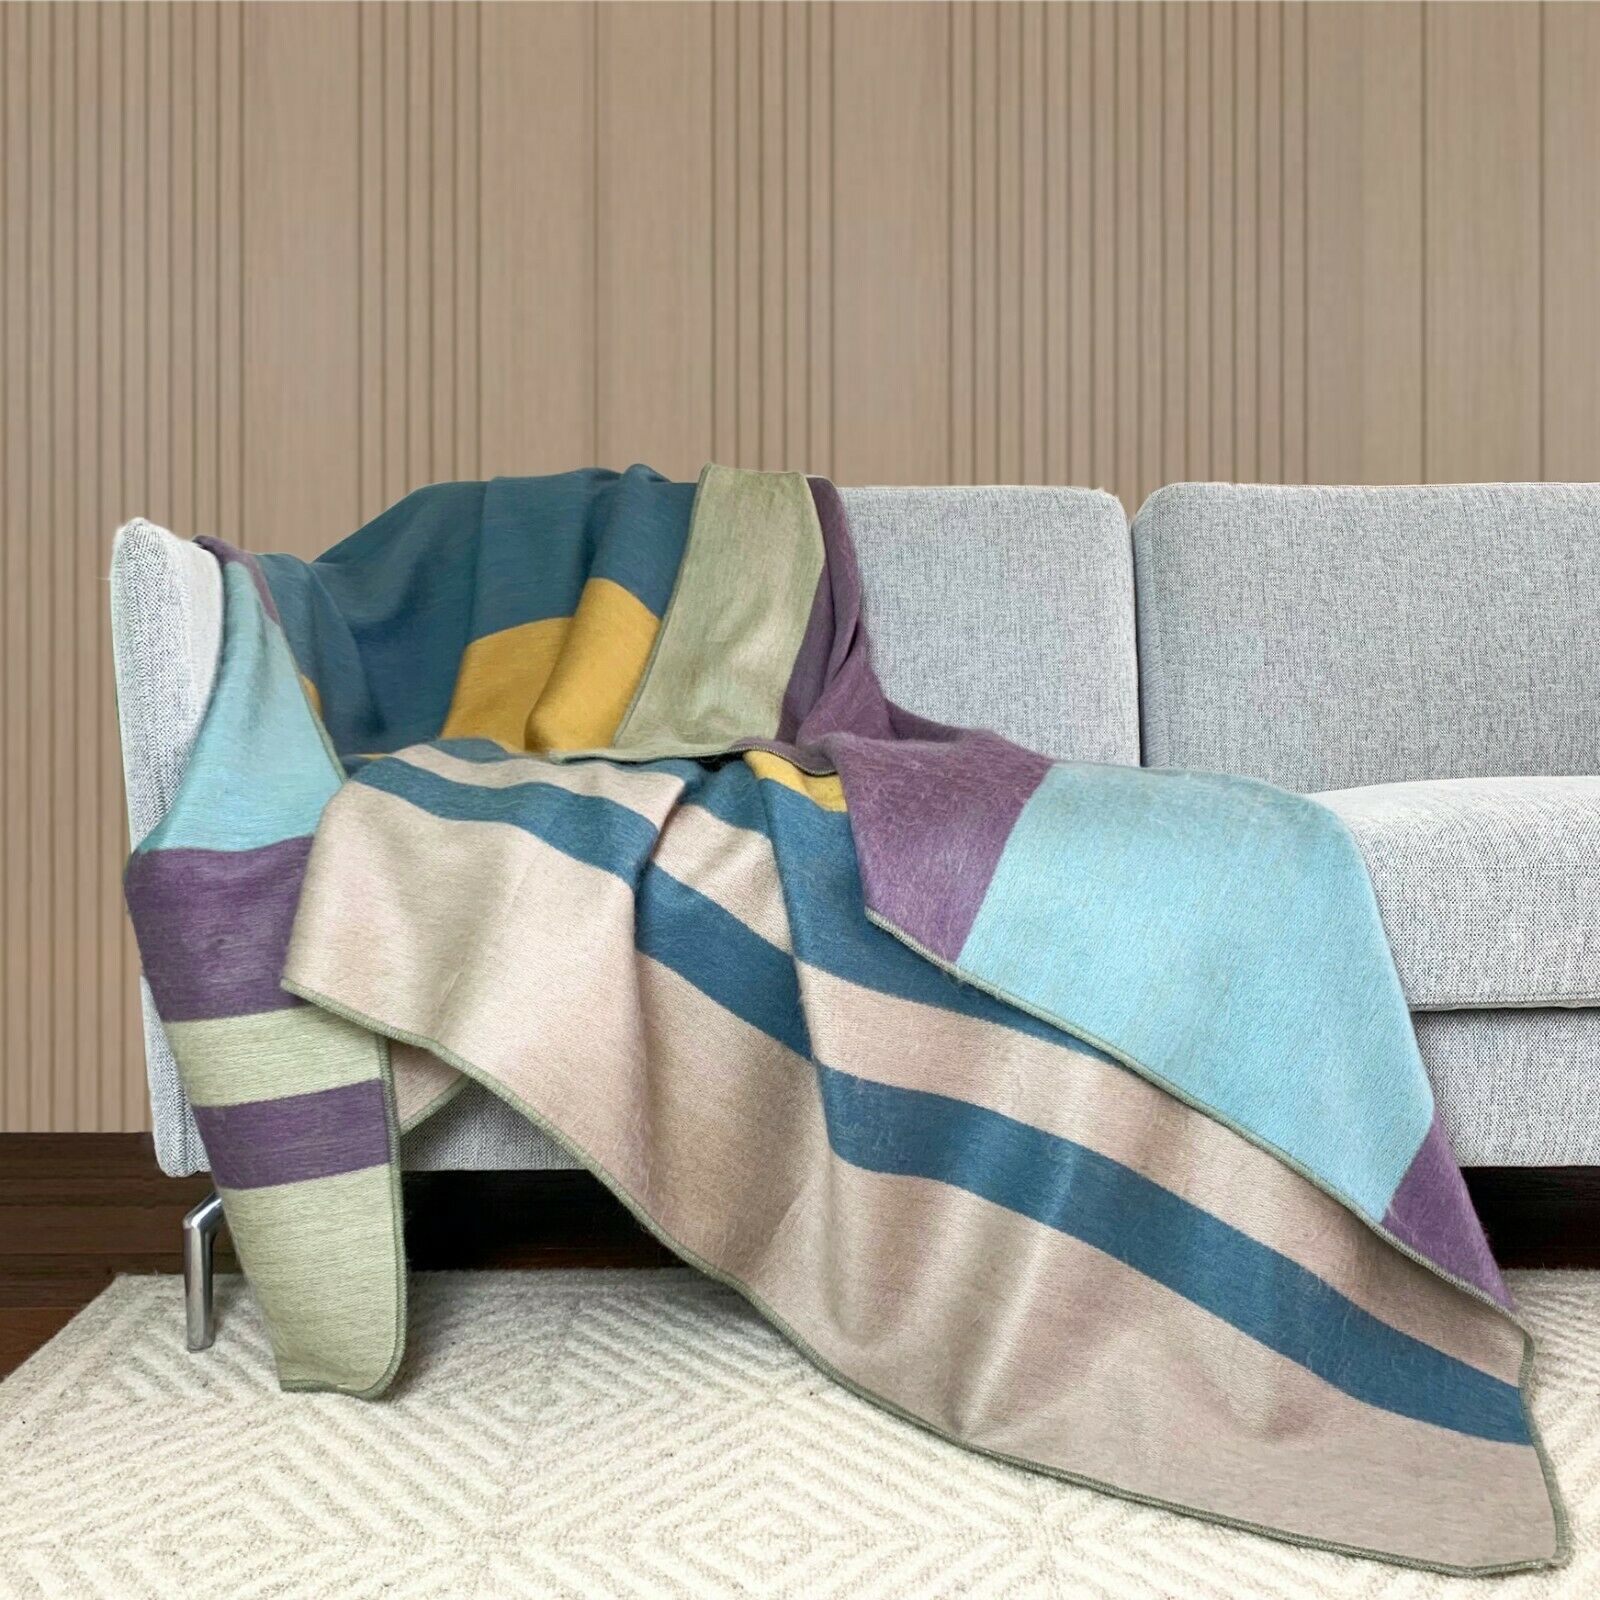 Guamani - Baby Alpaca wool throw blanket / sofa cover - Queen 94" x 62" - reversible double-sided